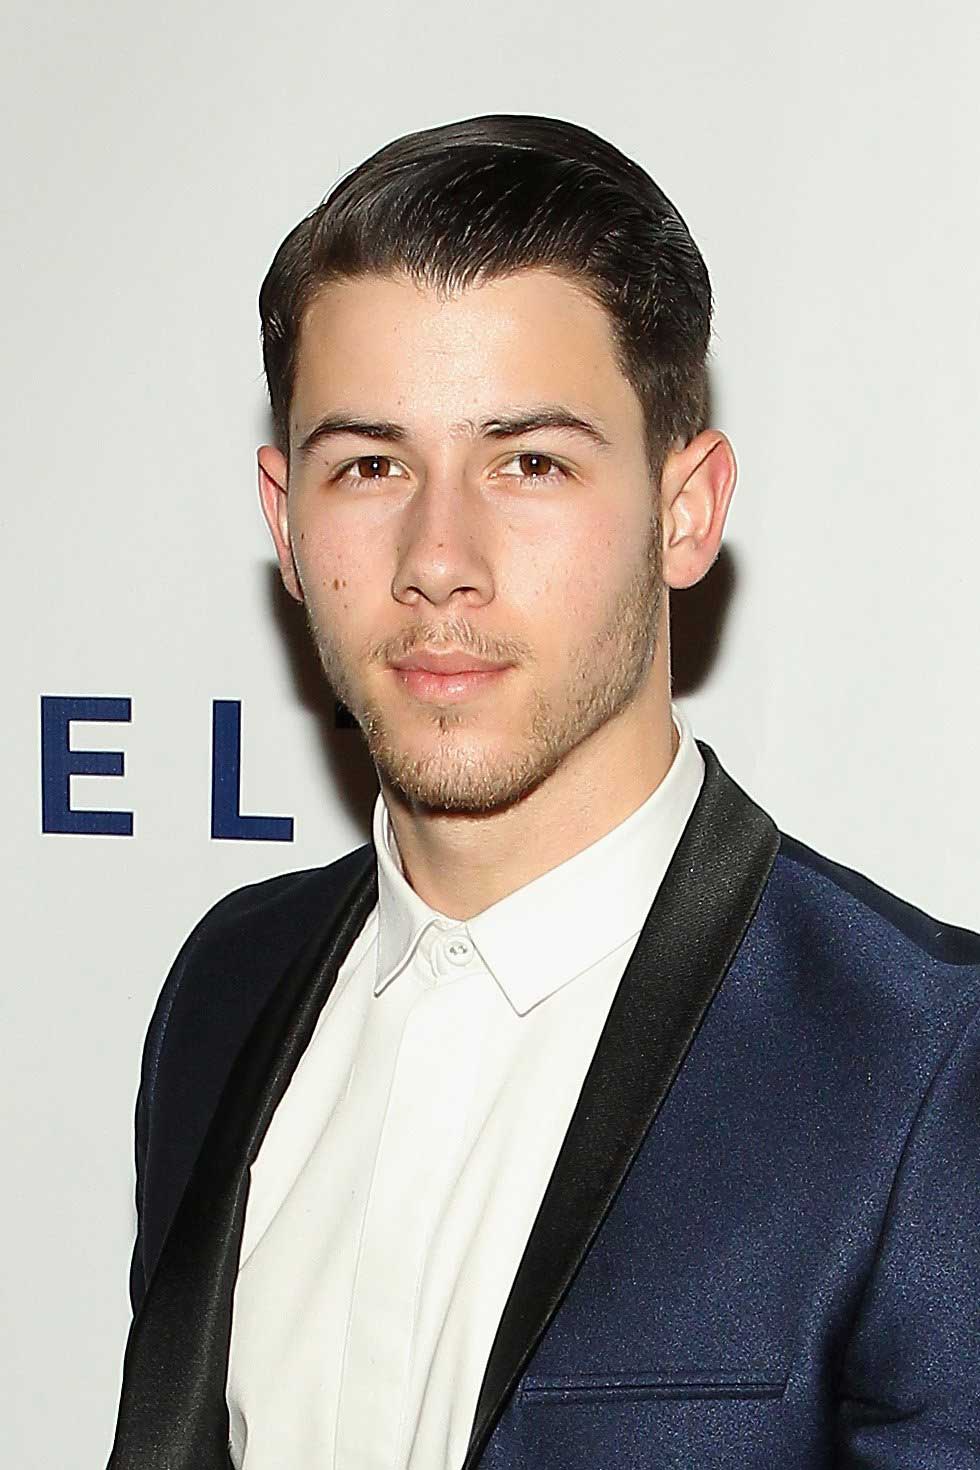 Nick Jonas attends an event at John F. Kennedy Center for the Performing Arts on Jan. 7, 2015 in Washington, DC.